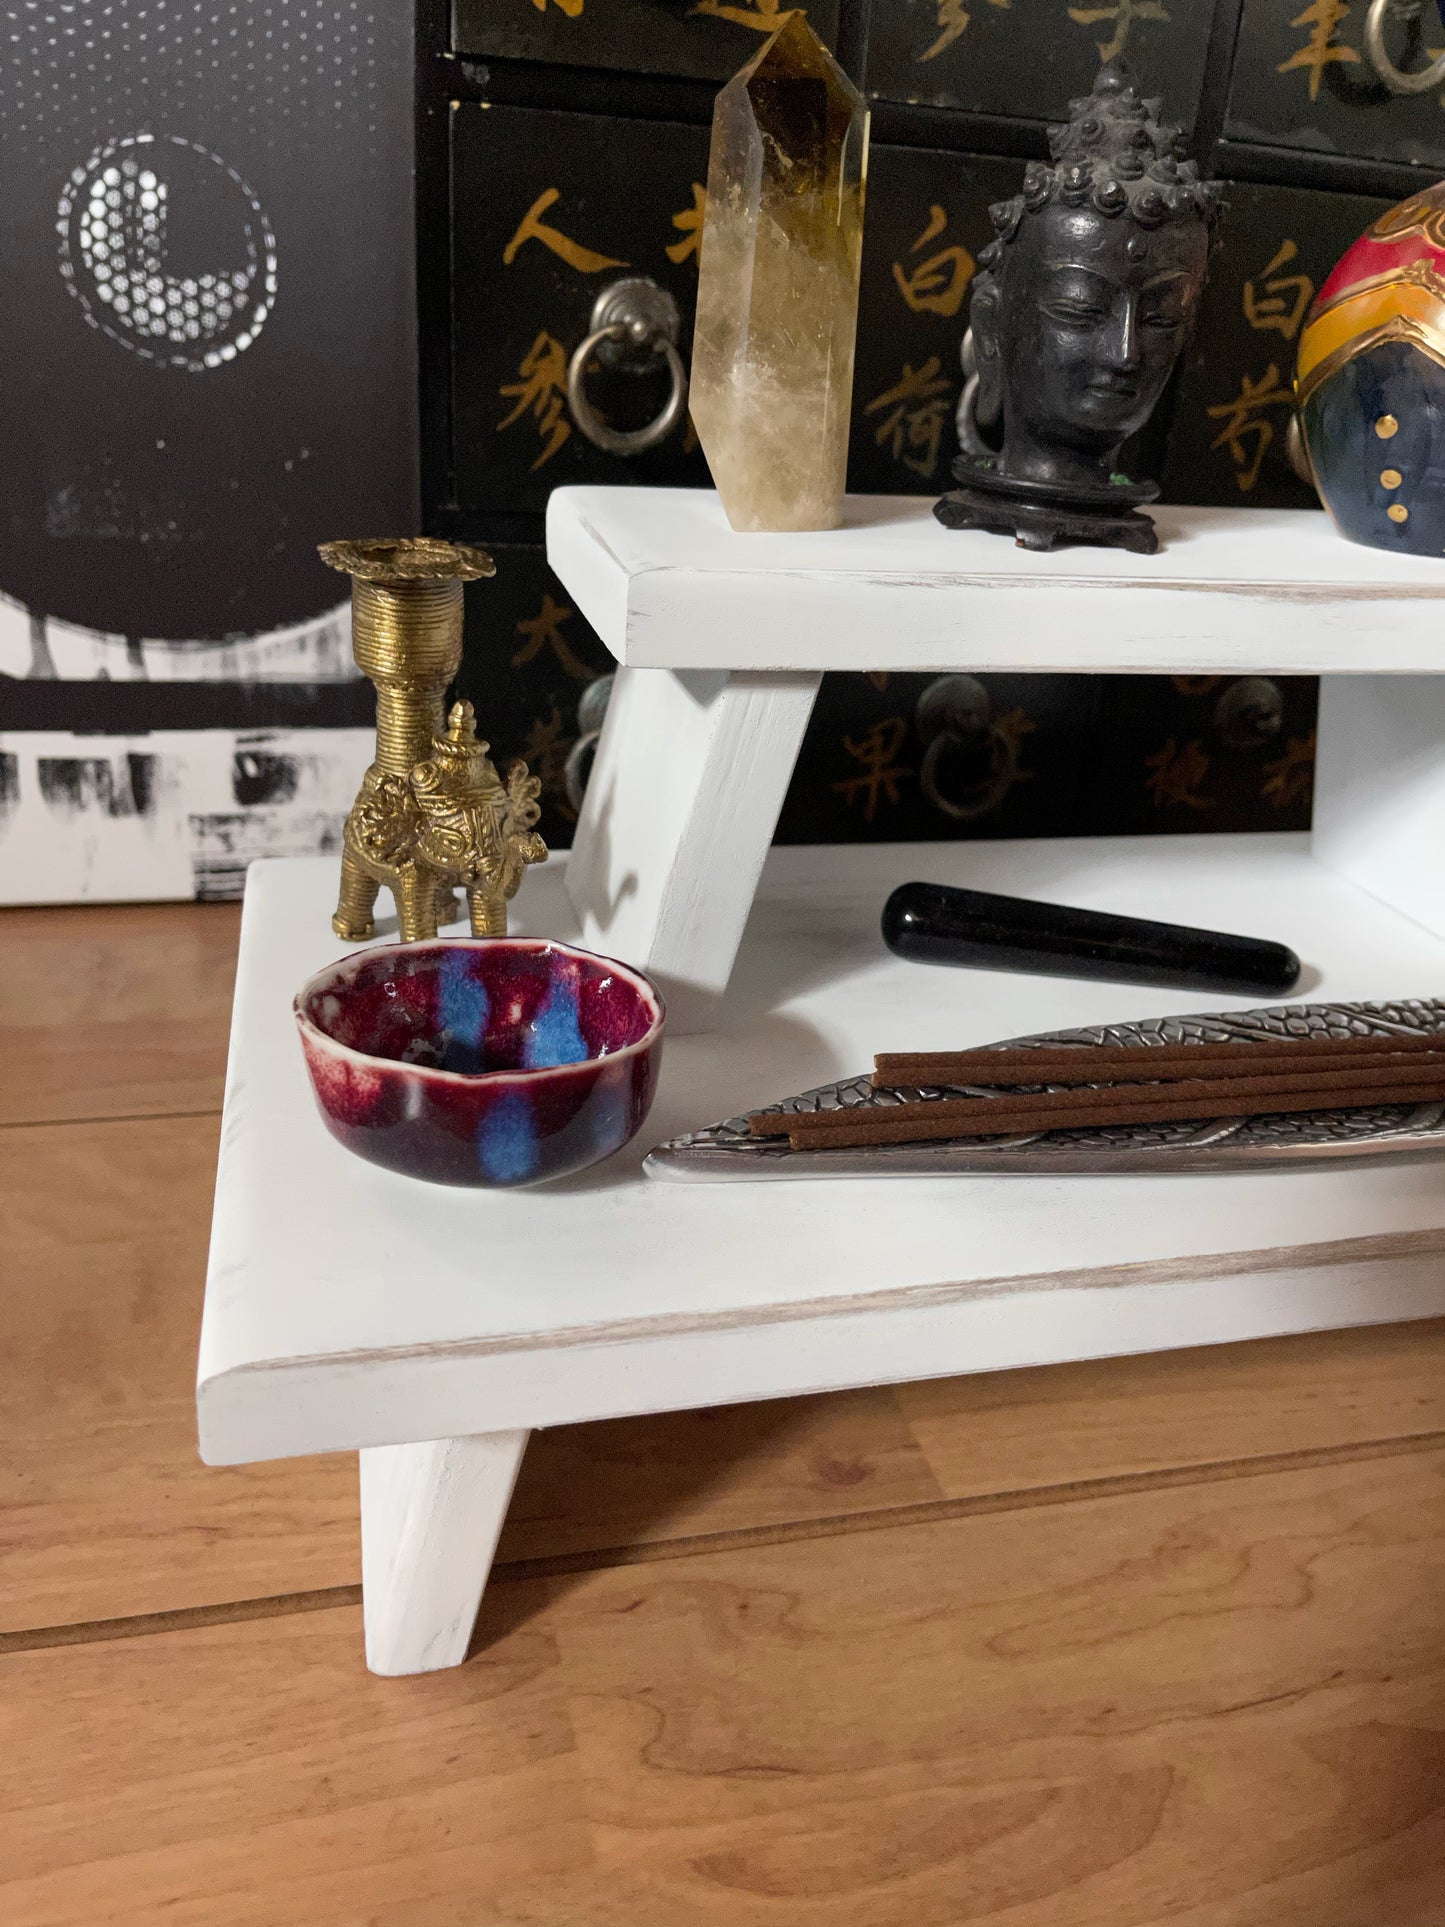 White Distressed with Gold Prosperity Meditation Table Set, Home Decor